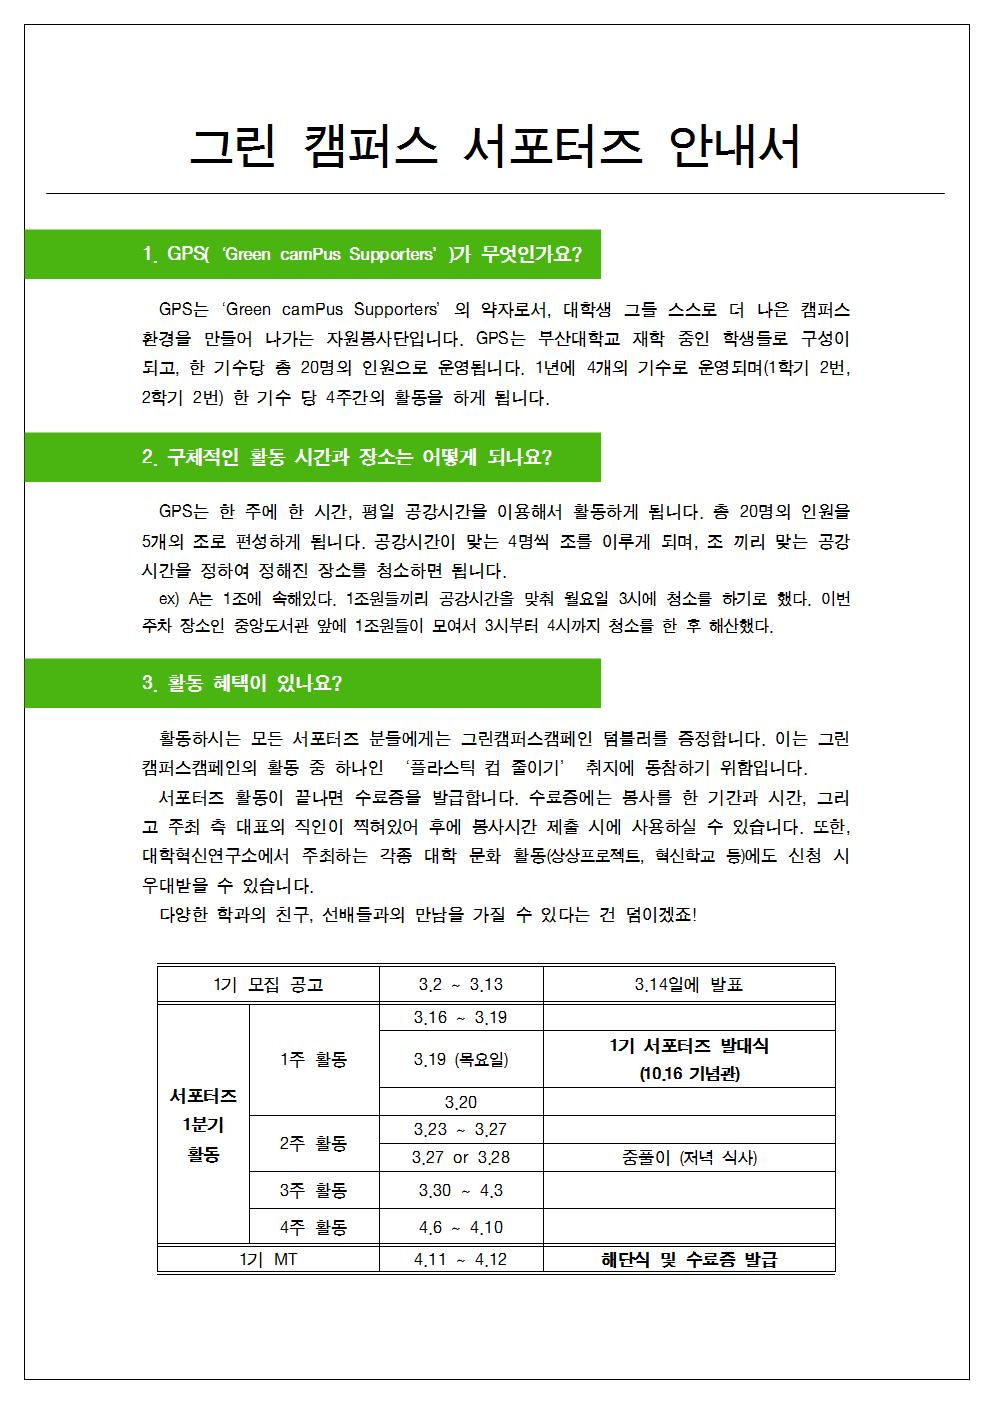 Green camPus Supporters 안내서001.jpg